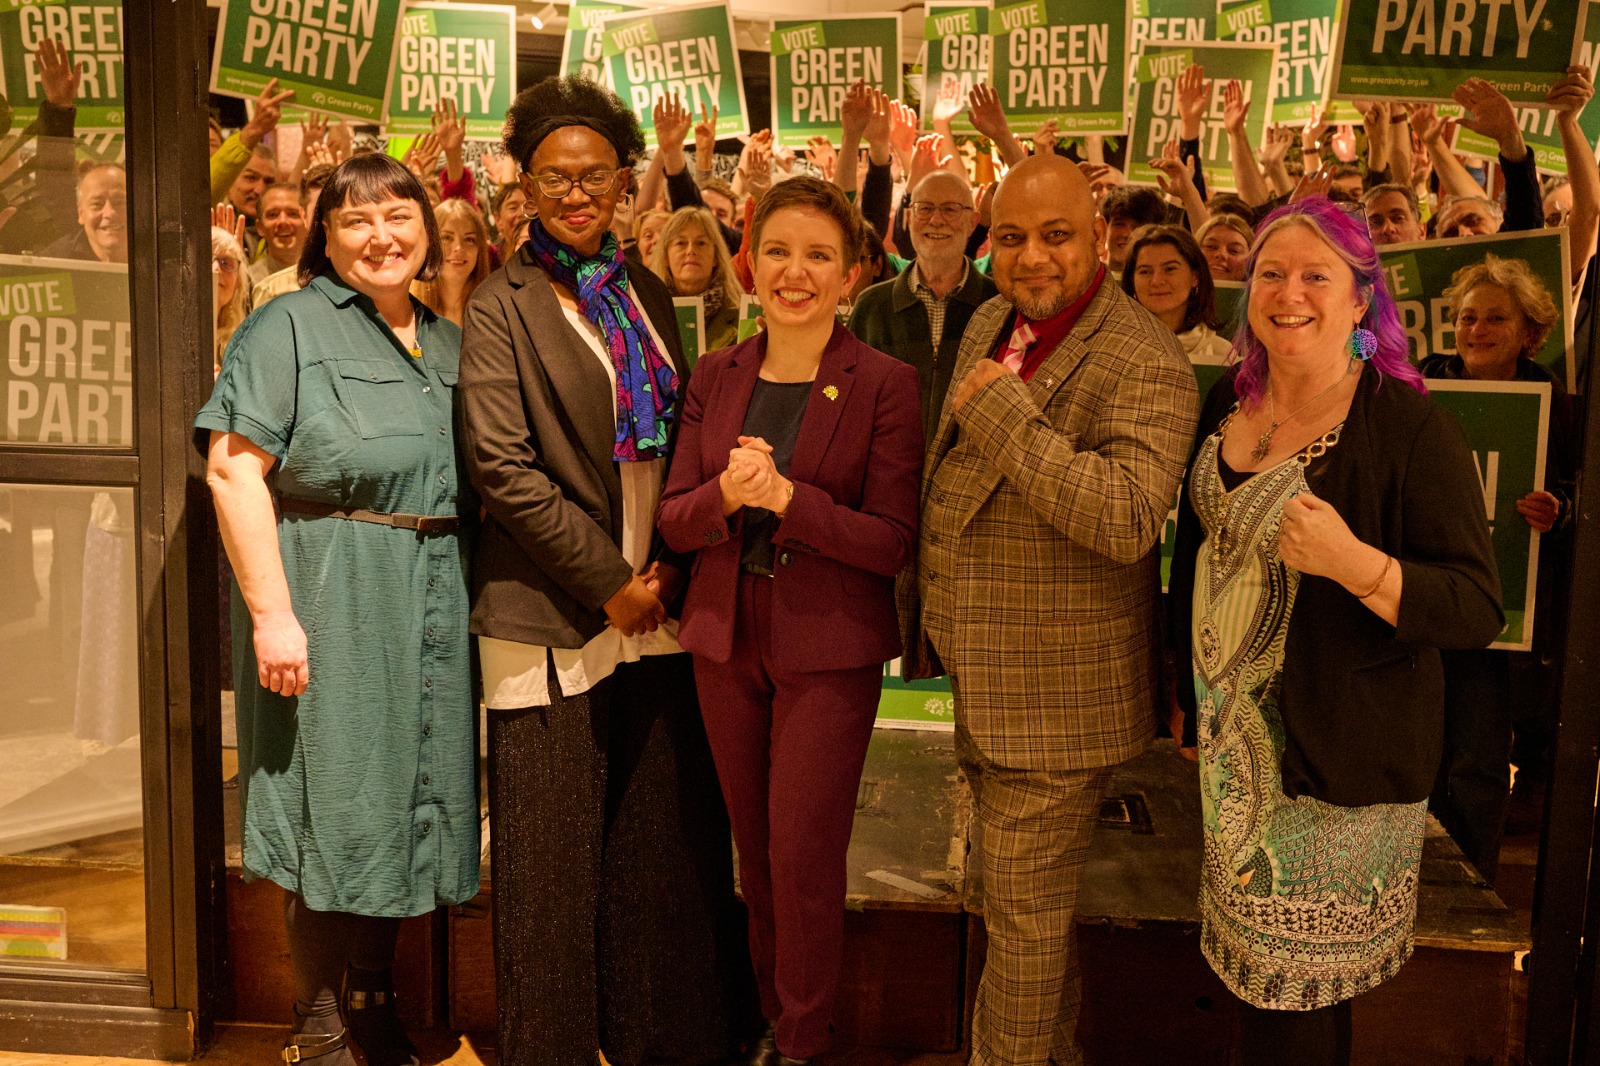 Green Party general election candidates, from left to right: Jai Breitnauer, Lorraine Francis, Carla Denyer, Naseem Talukdar and Mary Page.